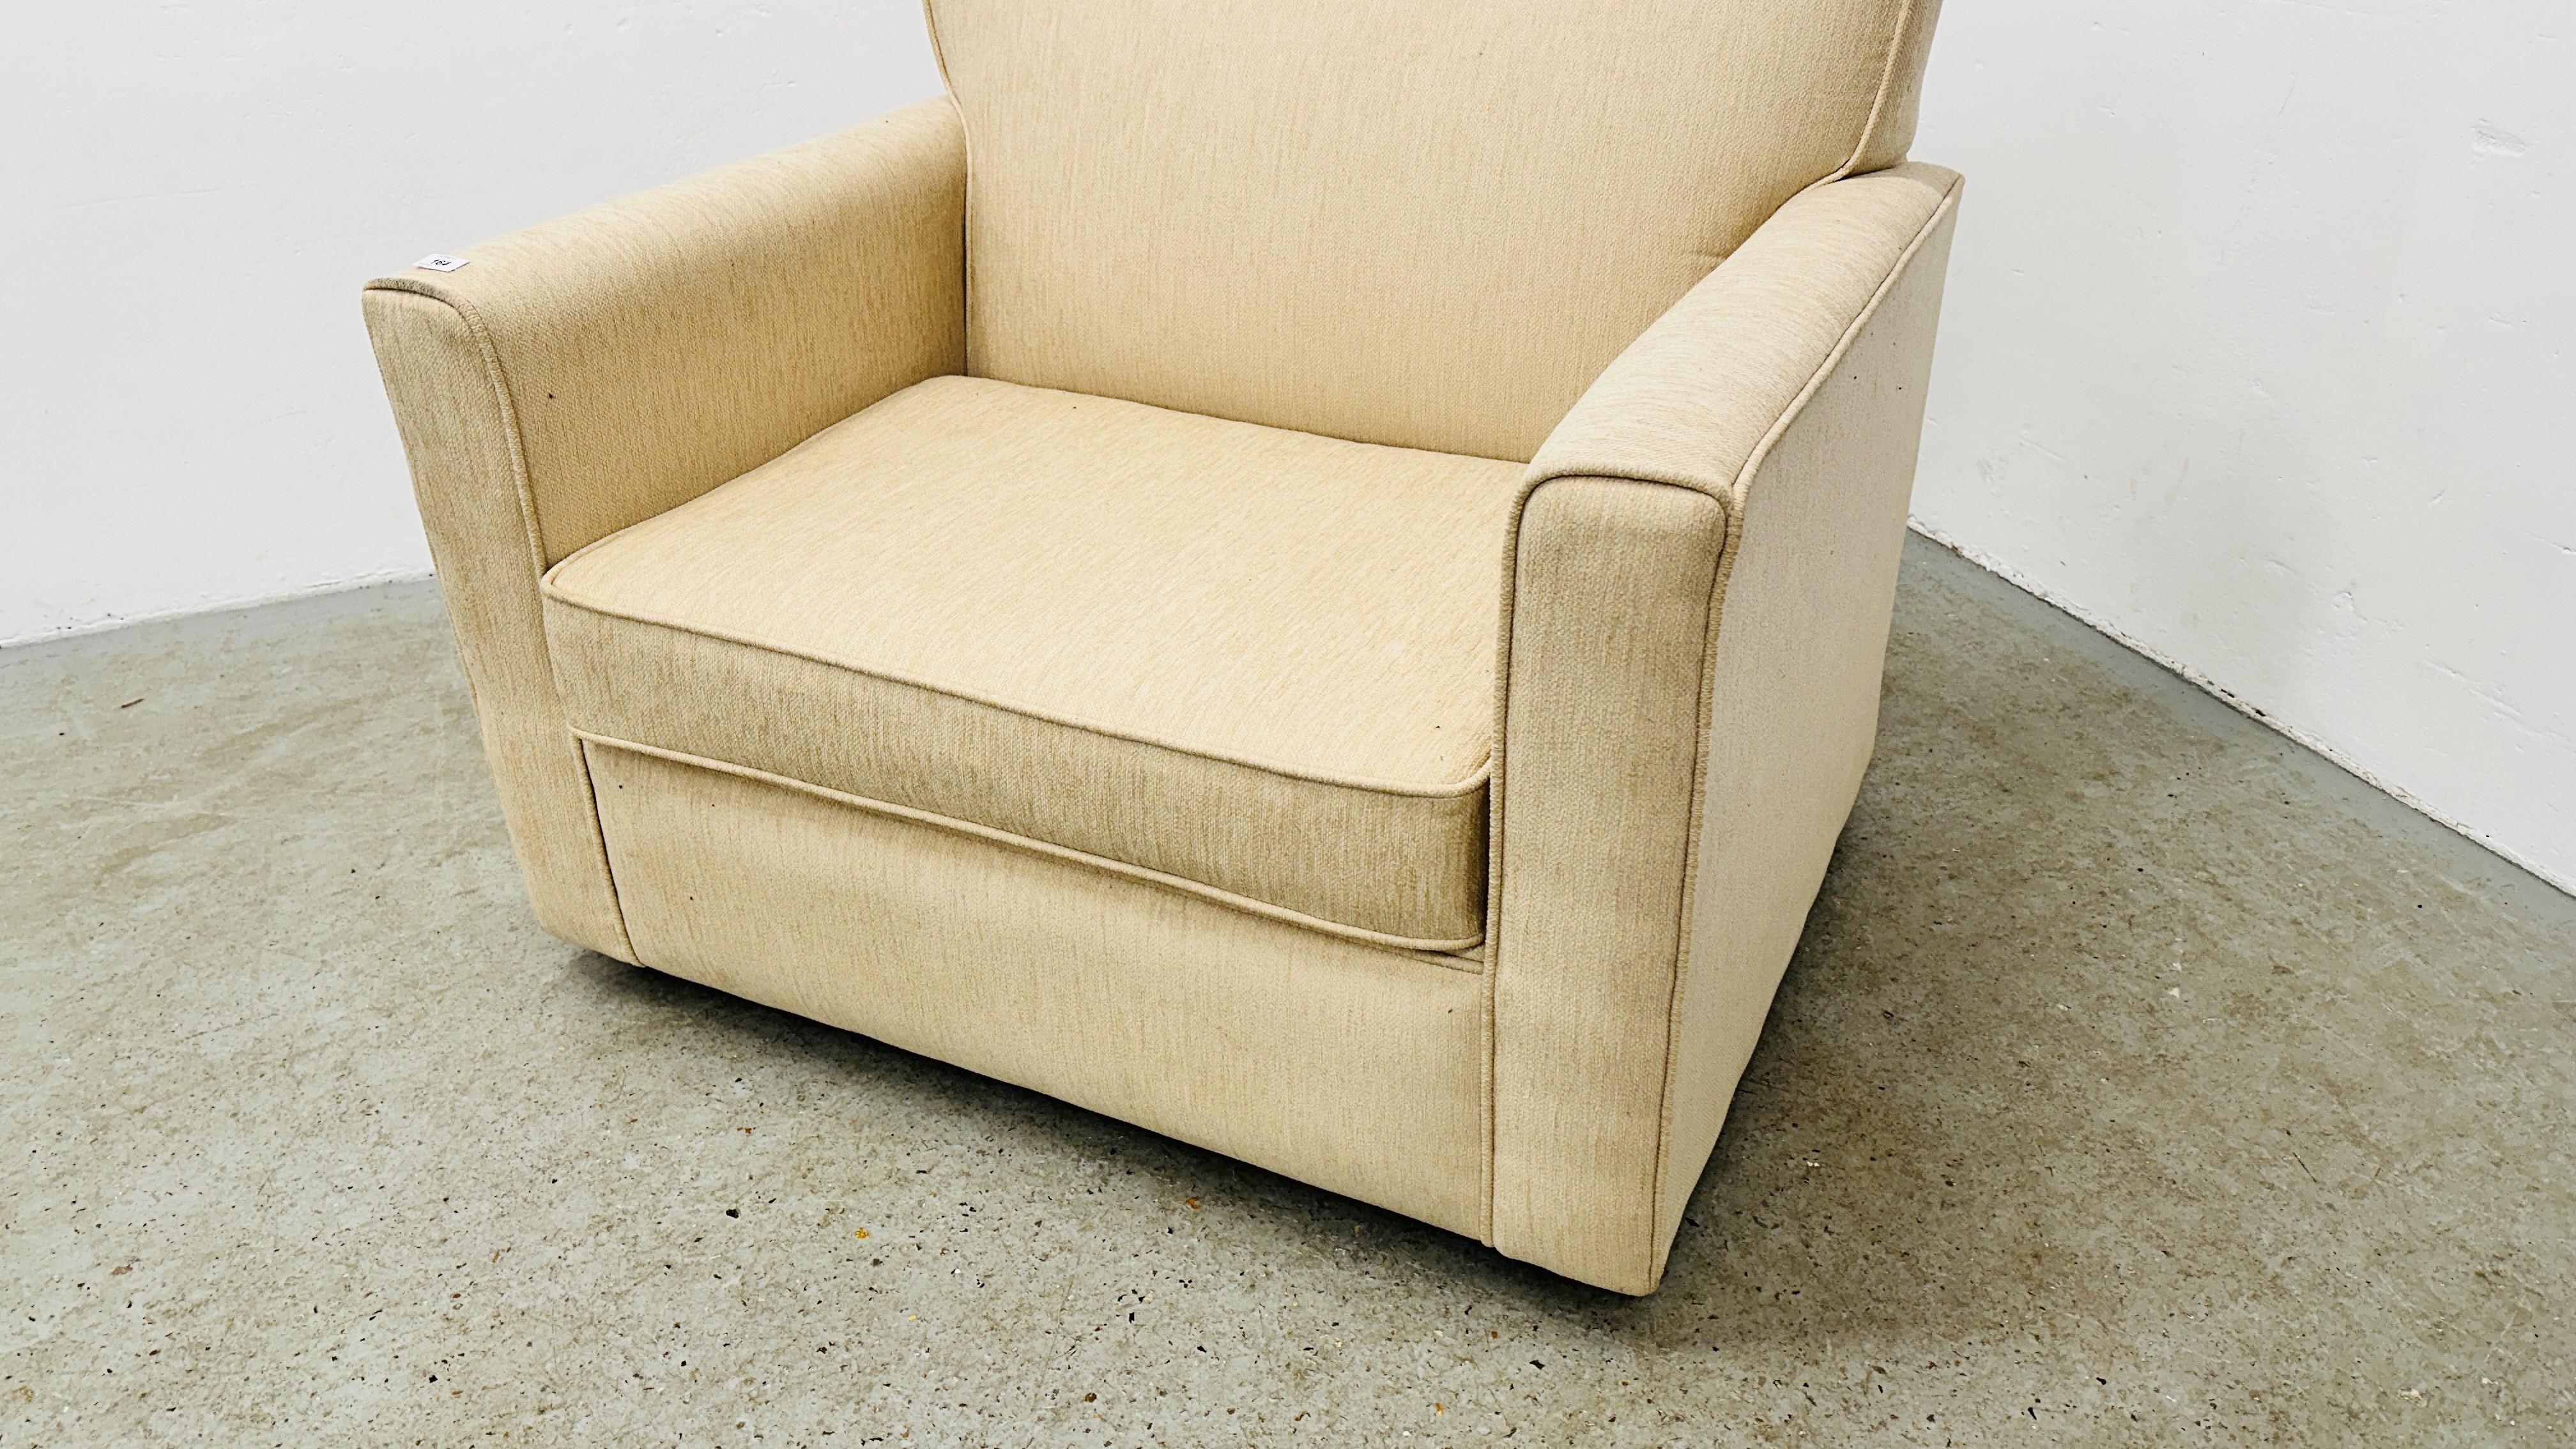 CREAM UPHOLSTERED ARM CHAIR / SOFA BED. - Image 6 of 12